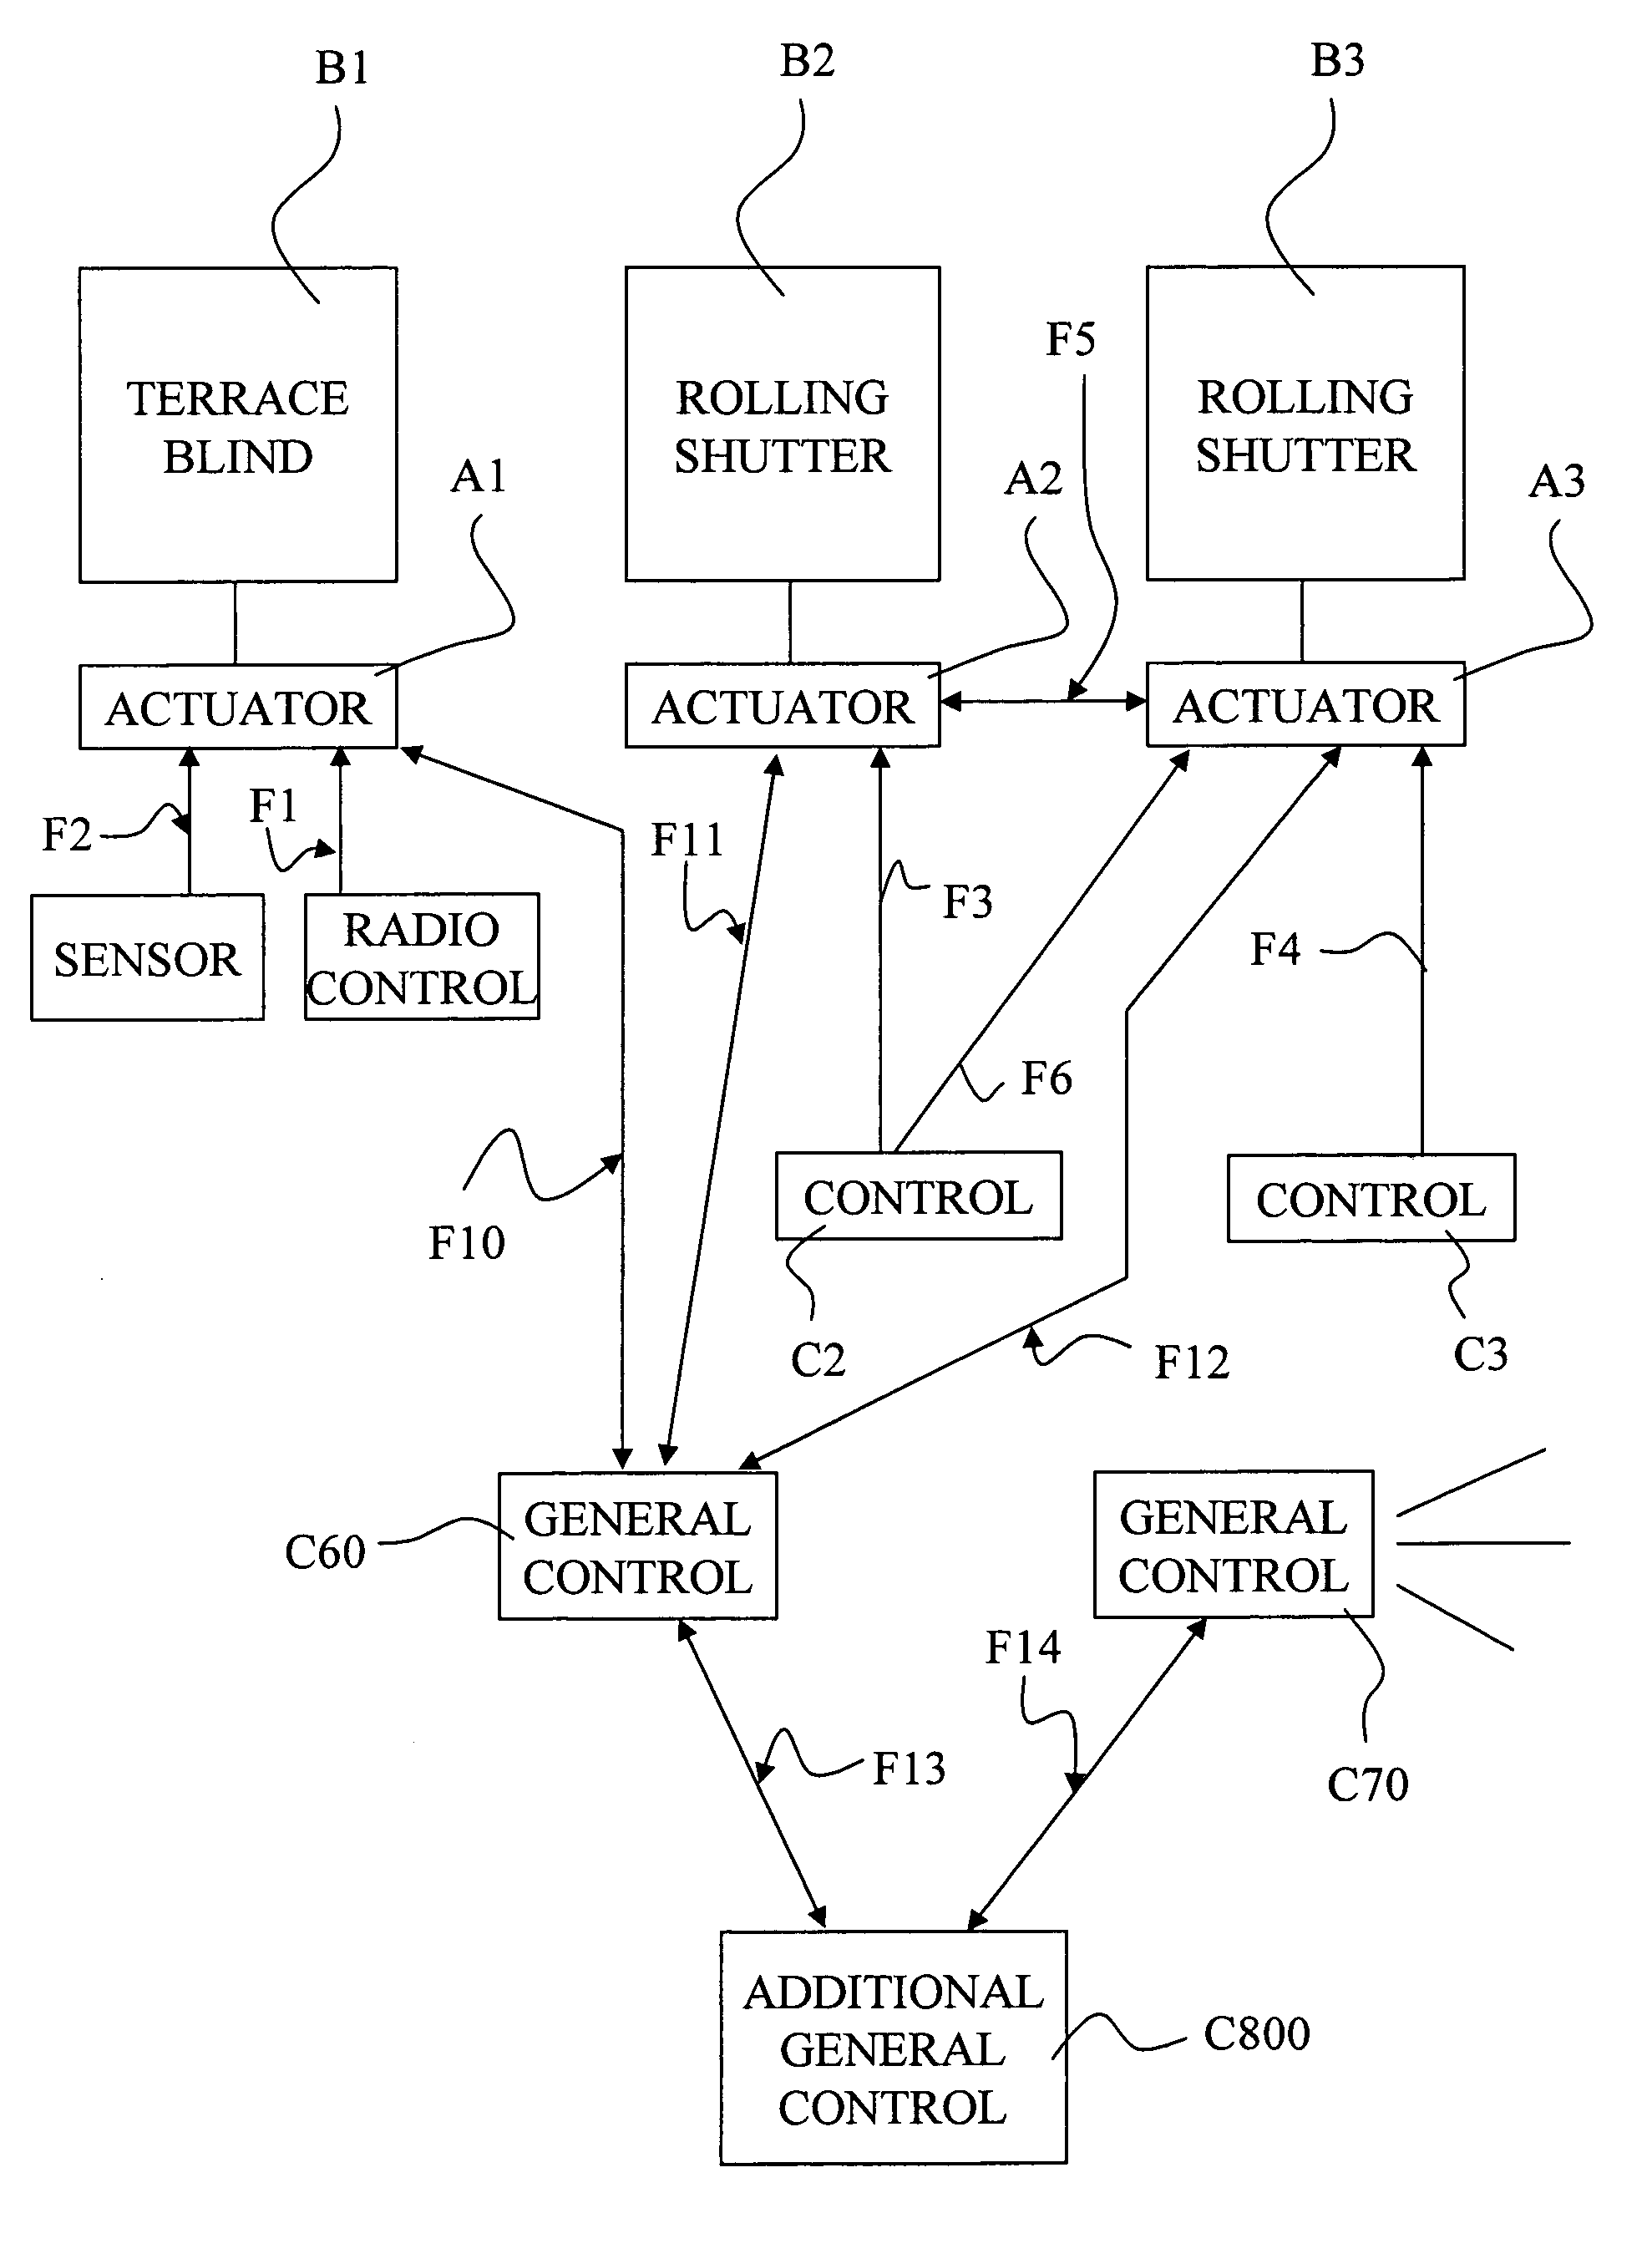 Method for constituting a home automation network